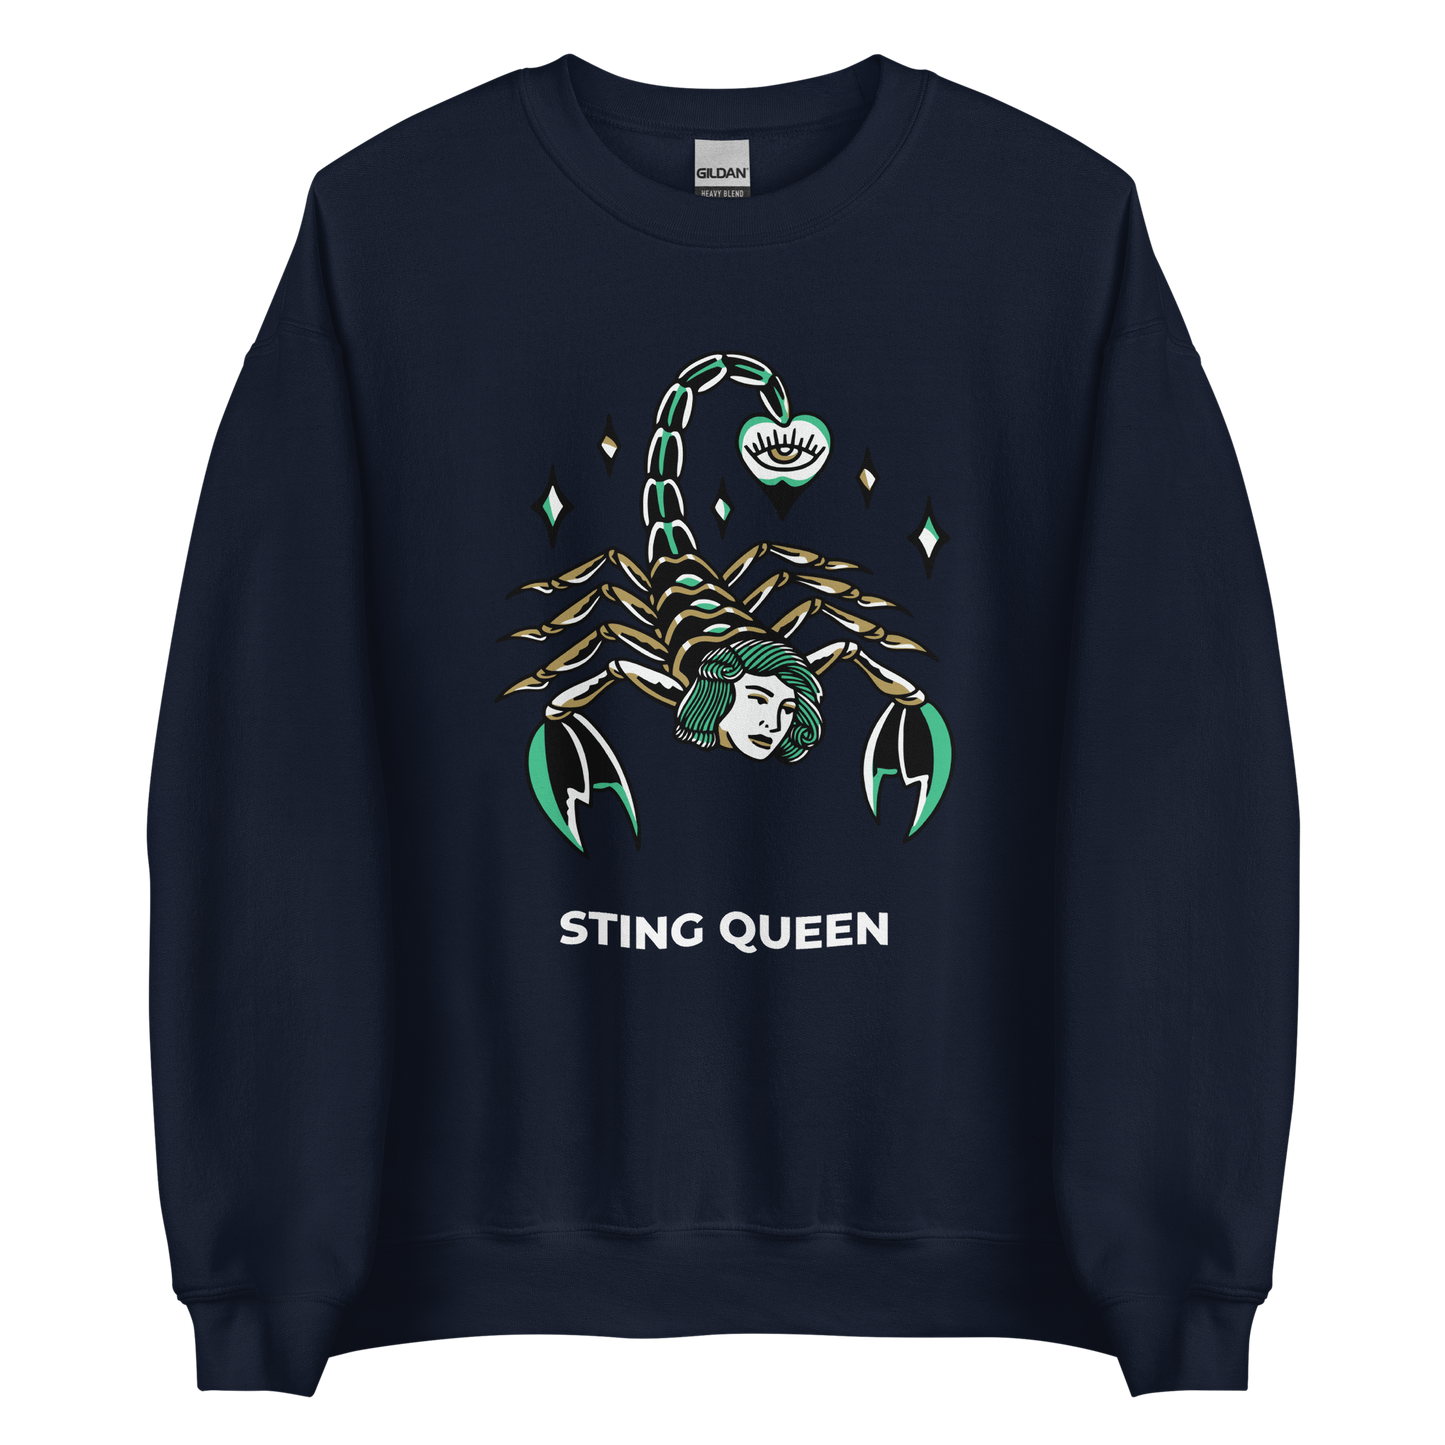 Navy Scorpion Sweatshirt featuring the Sting Queen graphic on the chest - Cool Graphic Scorpion Sweatshirts - Boozy Fox